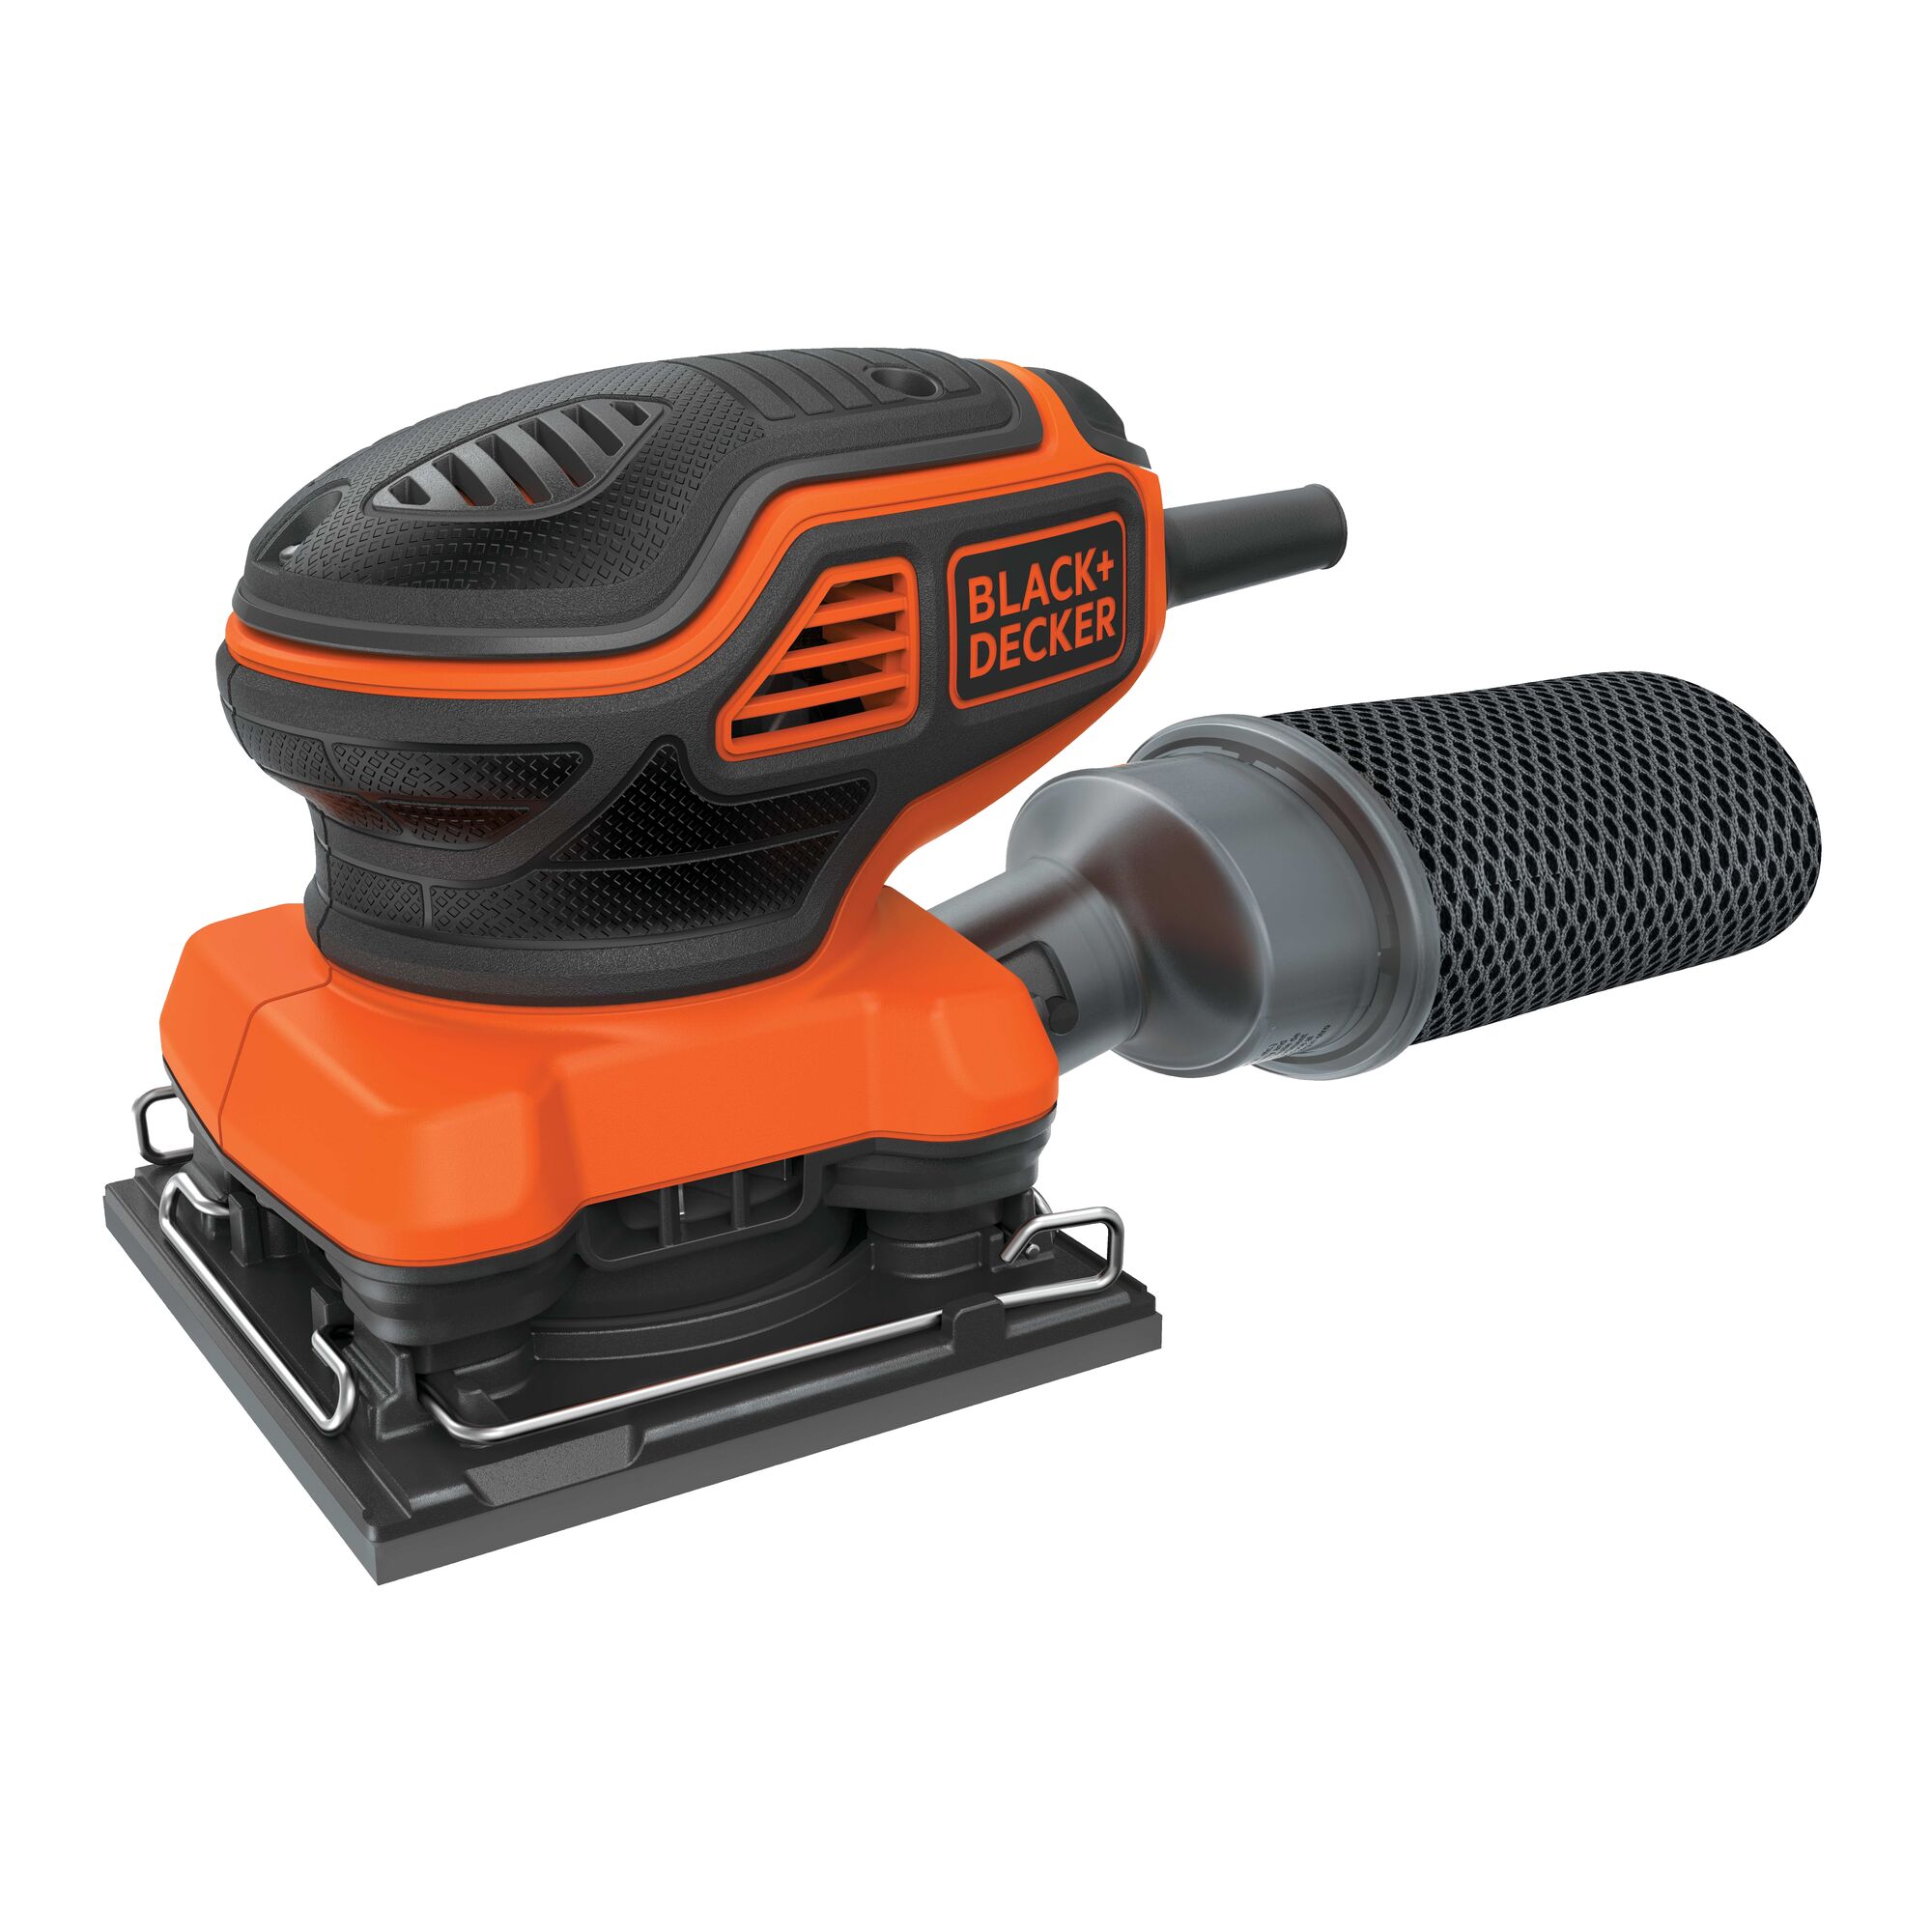 Quarter Sheet Orbital Sander with Paddle Switch Actuation.